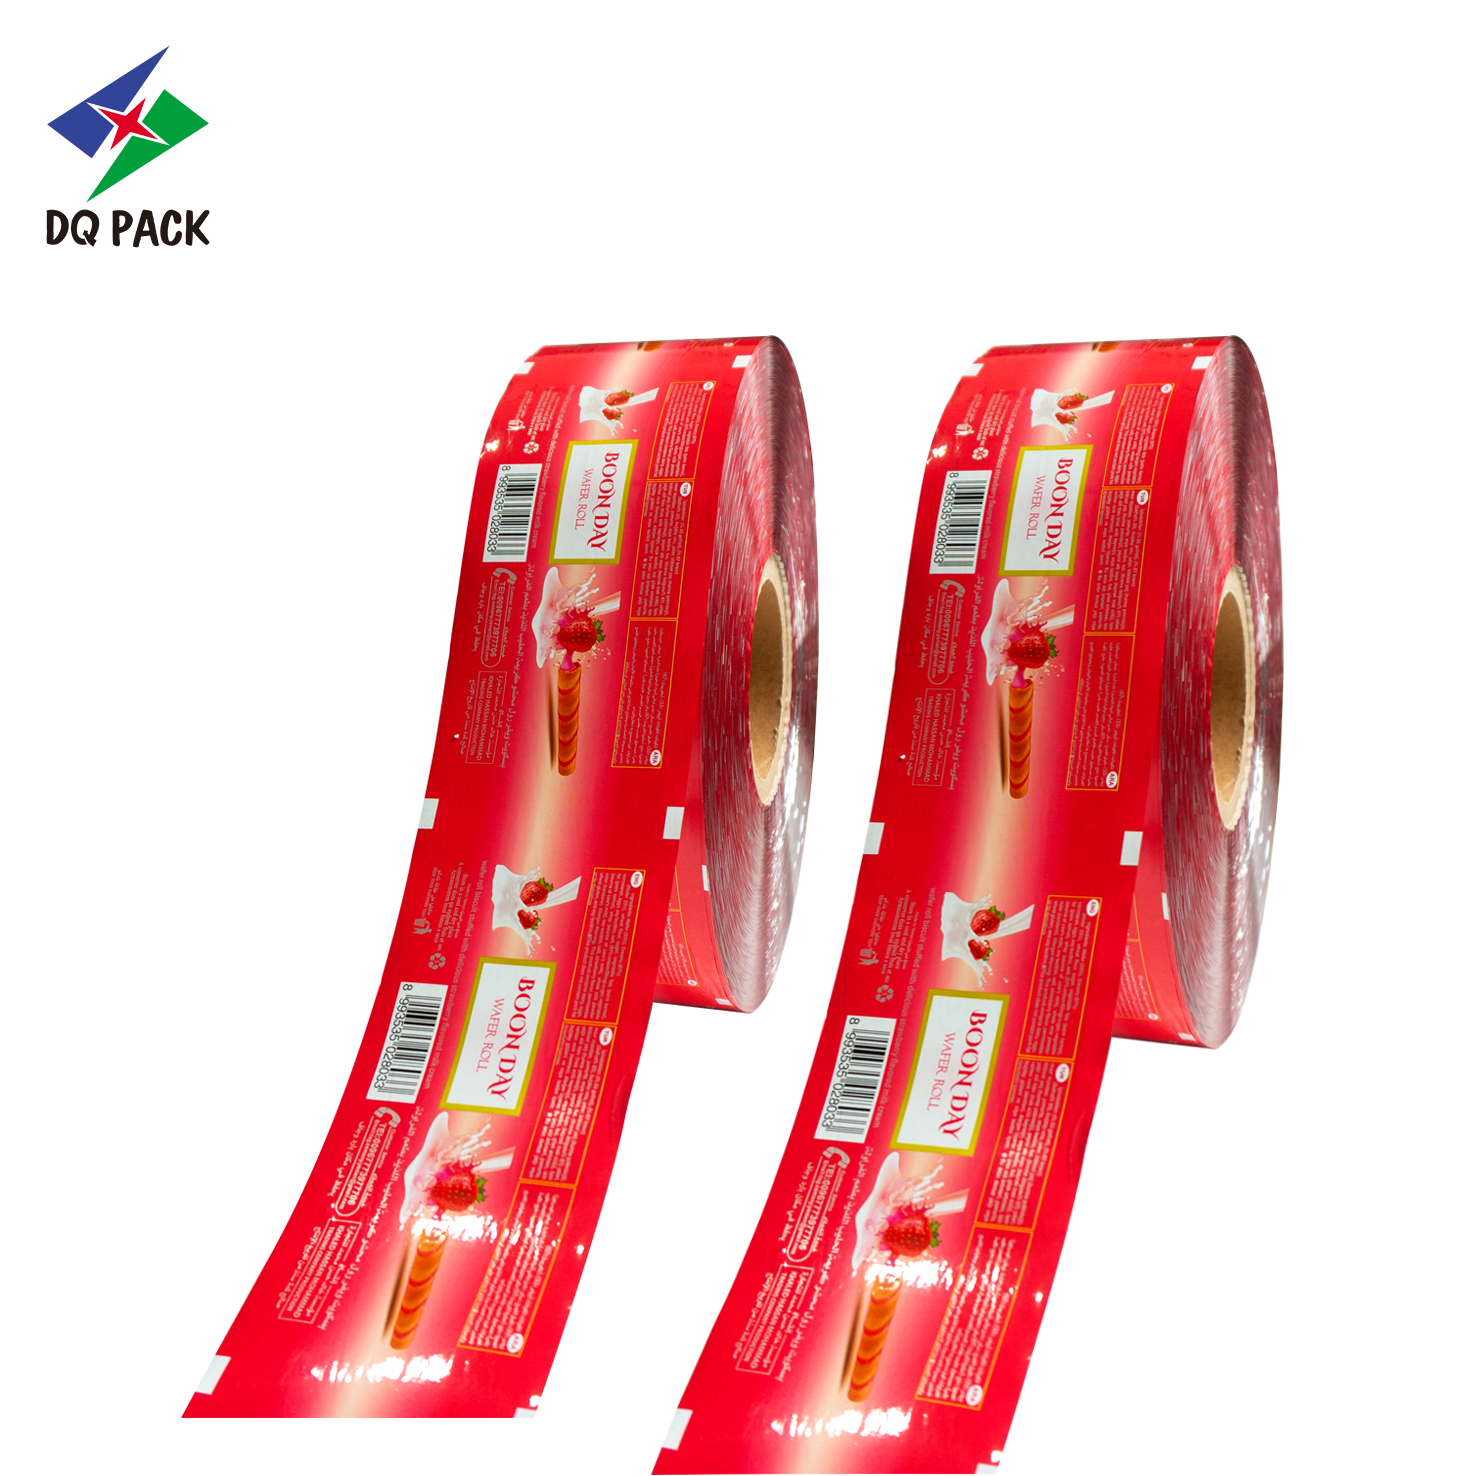 DQ PACK China Supplier Plastic Packaging Film Snack Roll Stock Film